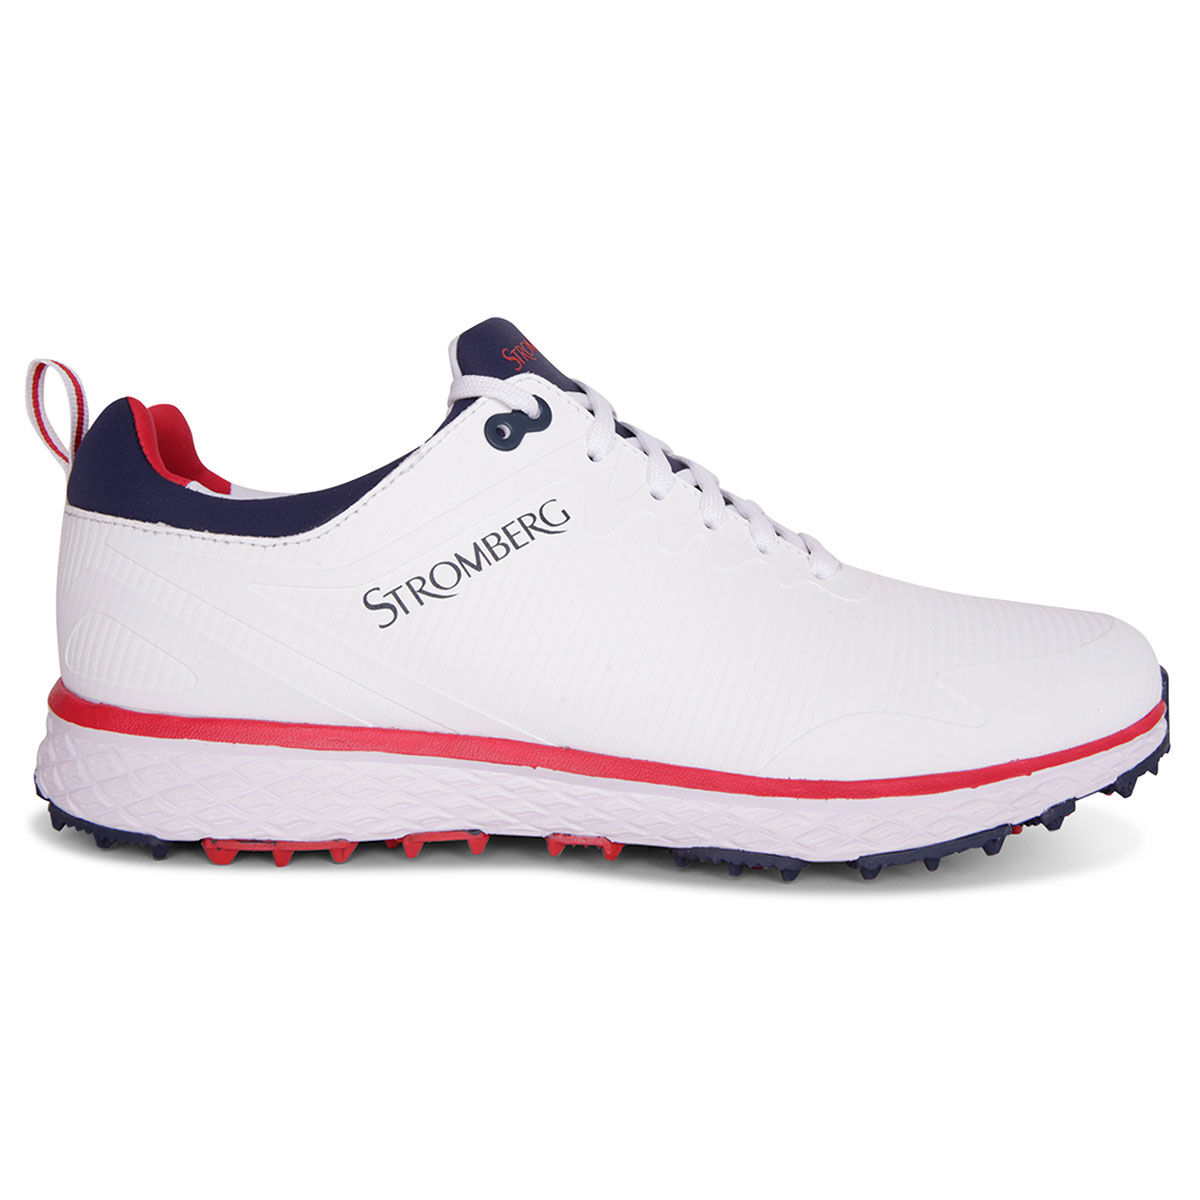 Stromberg Mens White, Red and Navy Blue Waterproof Tempo Spikeless Golf Shoes, Size: 8  | American Golf